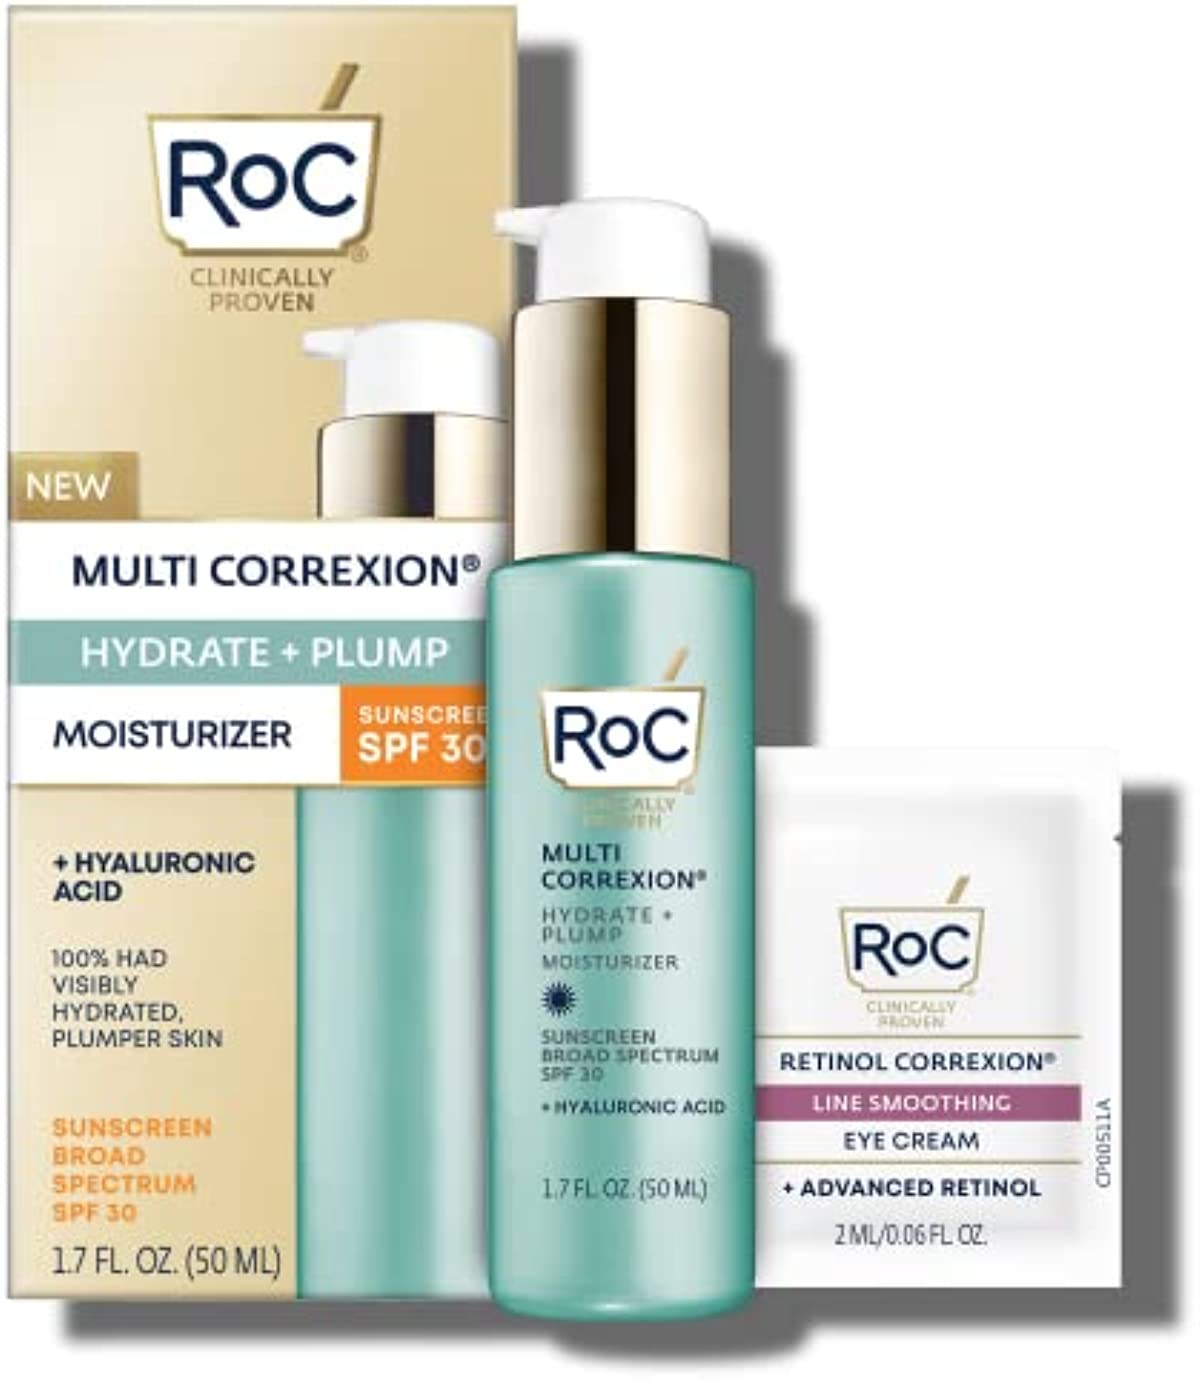 RoC Multi Correxion 1.5{246eb326121925eae9f805b36f8f320049ce26047920ec7cef0eaf2a193828d9} Pure Hyaluronic Acid Anti Aging Daily Face Moisturizer with Broad Spectrum Sunscreen SPF 30 (1.7 oz) + Eye Cream Packette, Paraben-free Skin Care for Women & Men